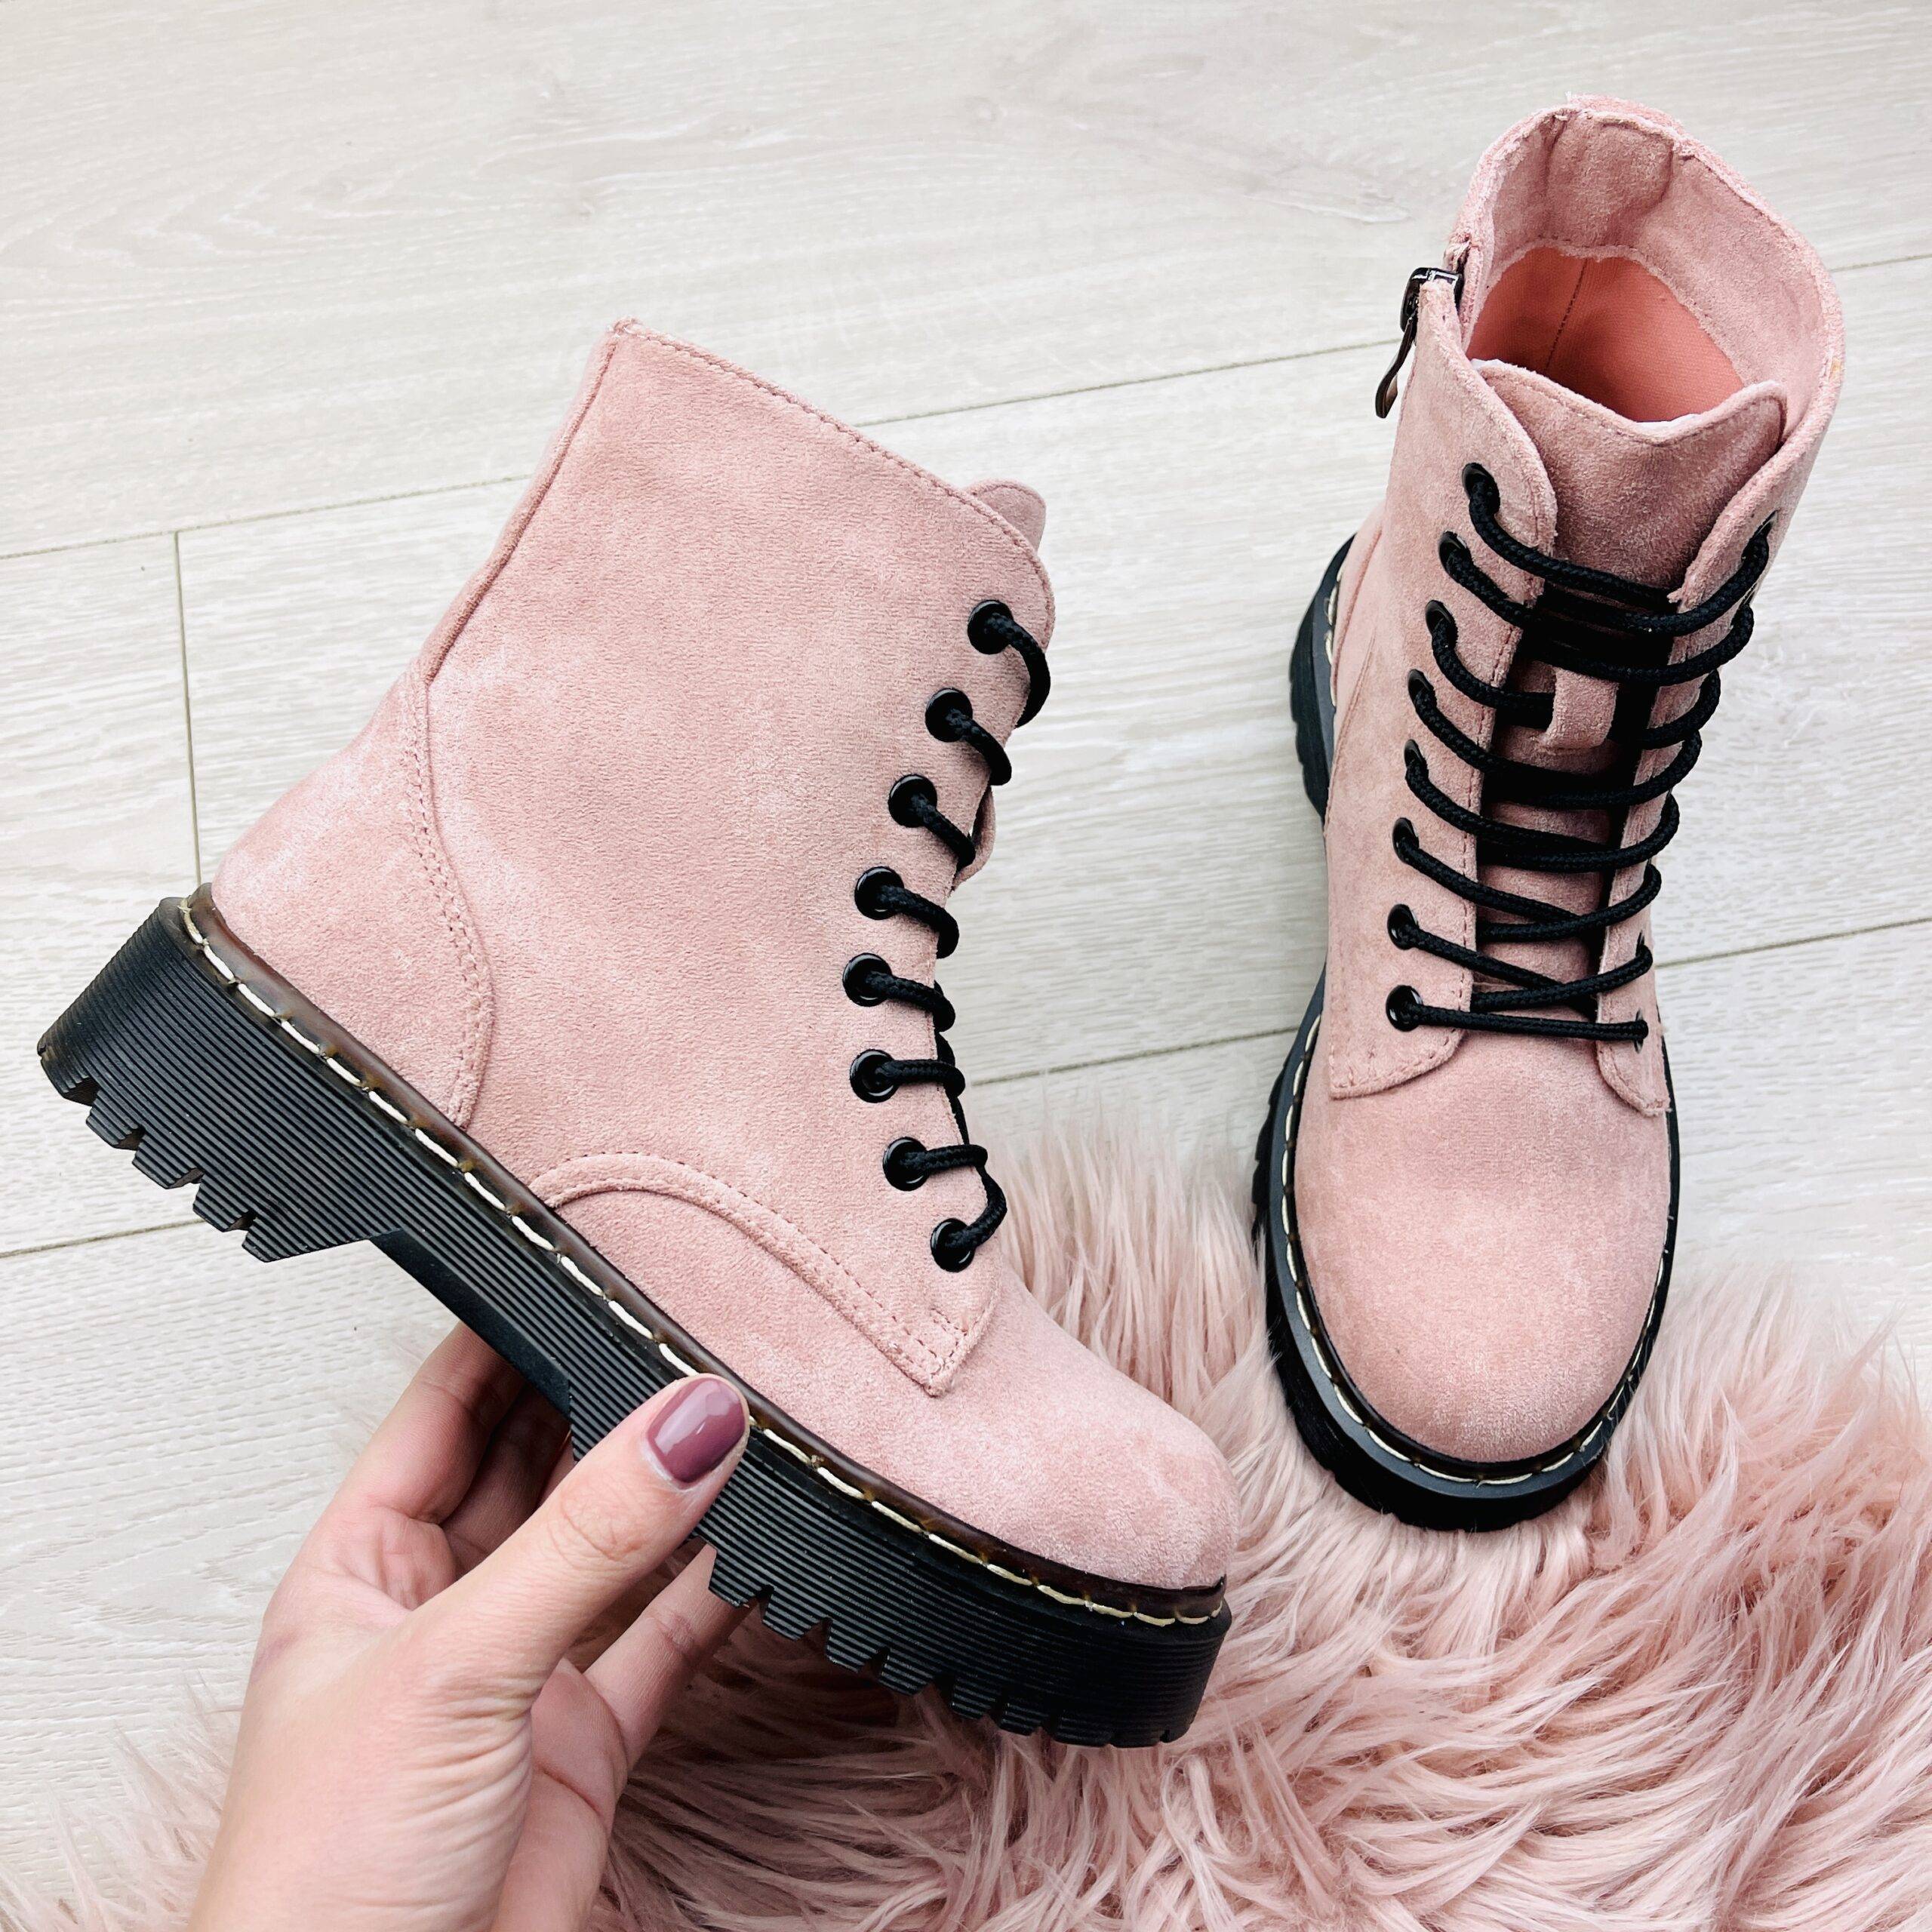 Rio Pinky Boots